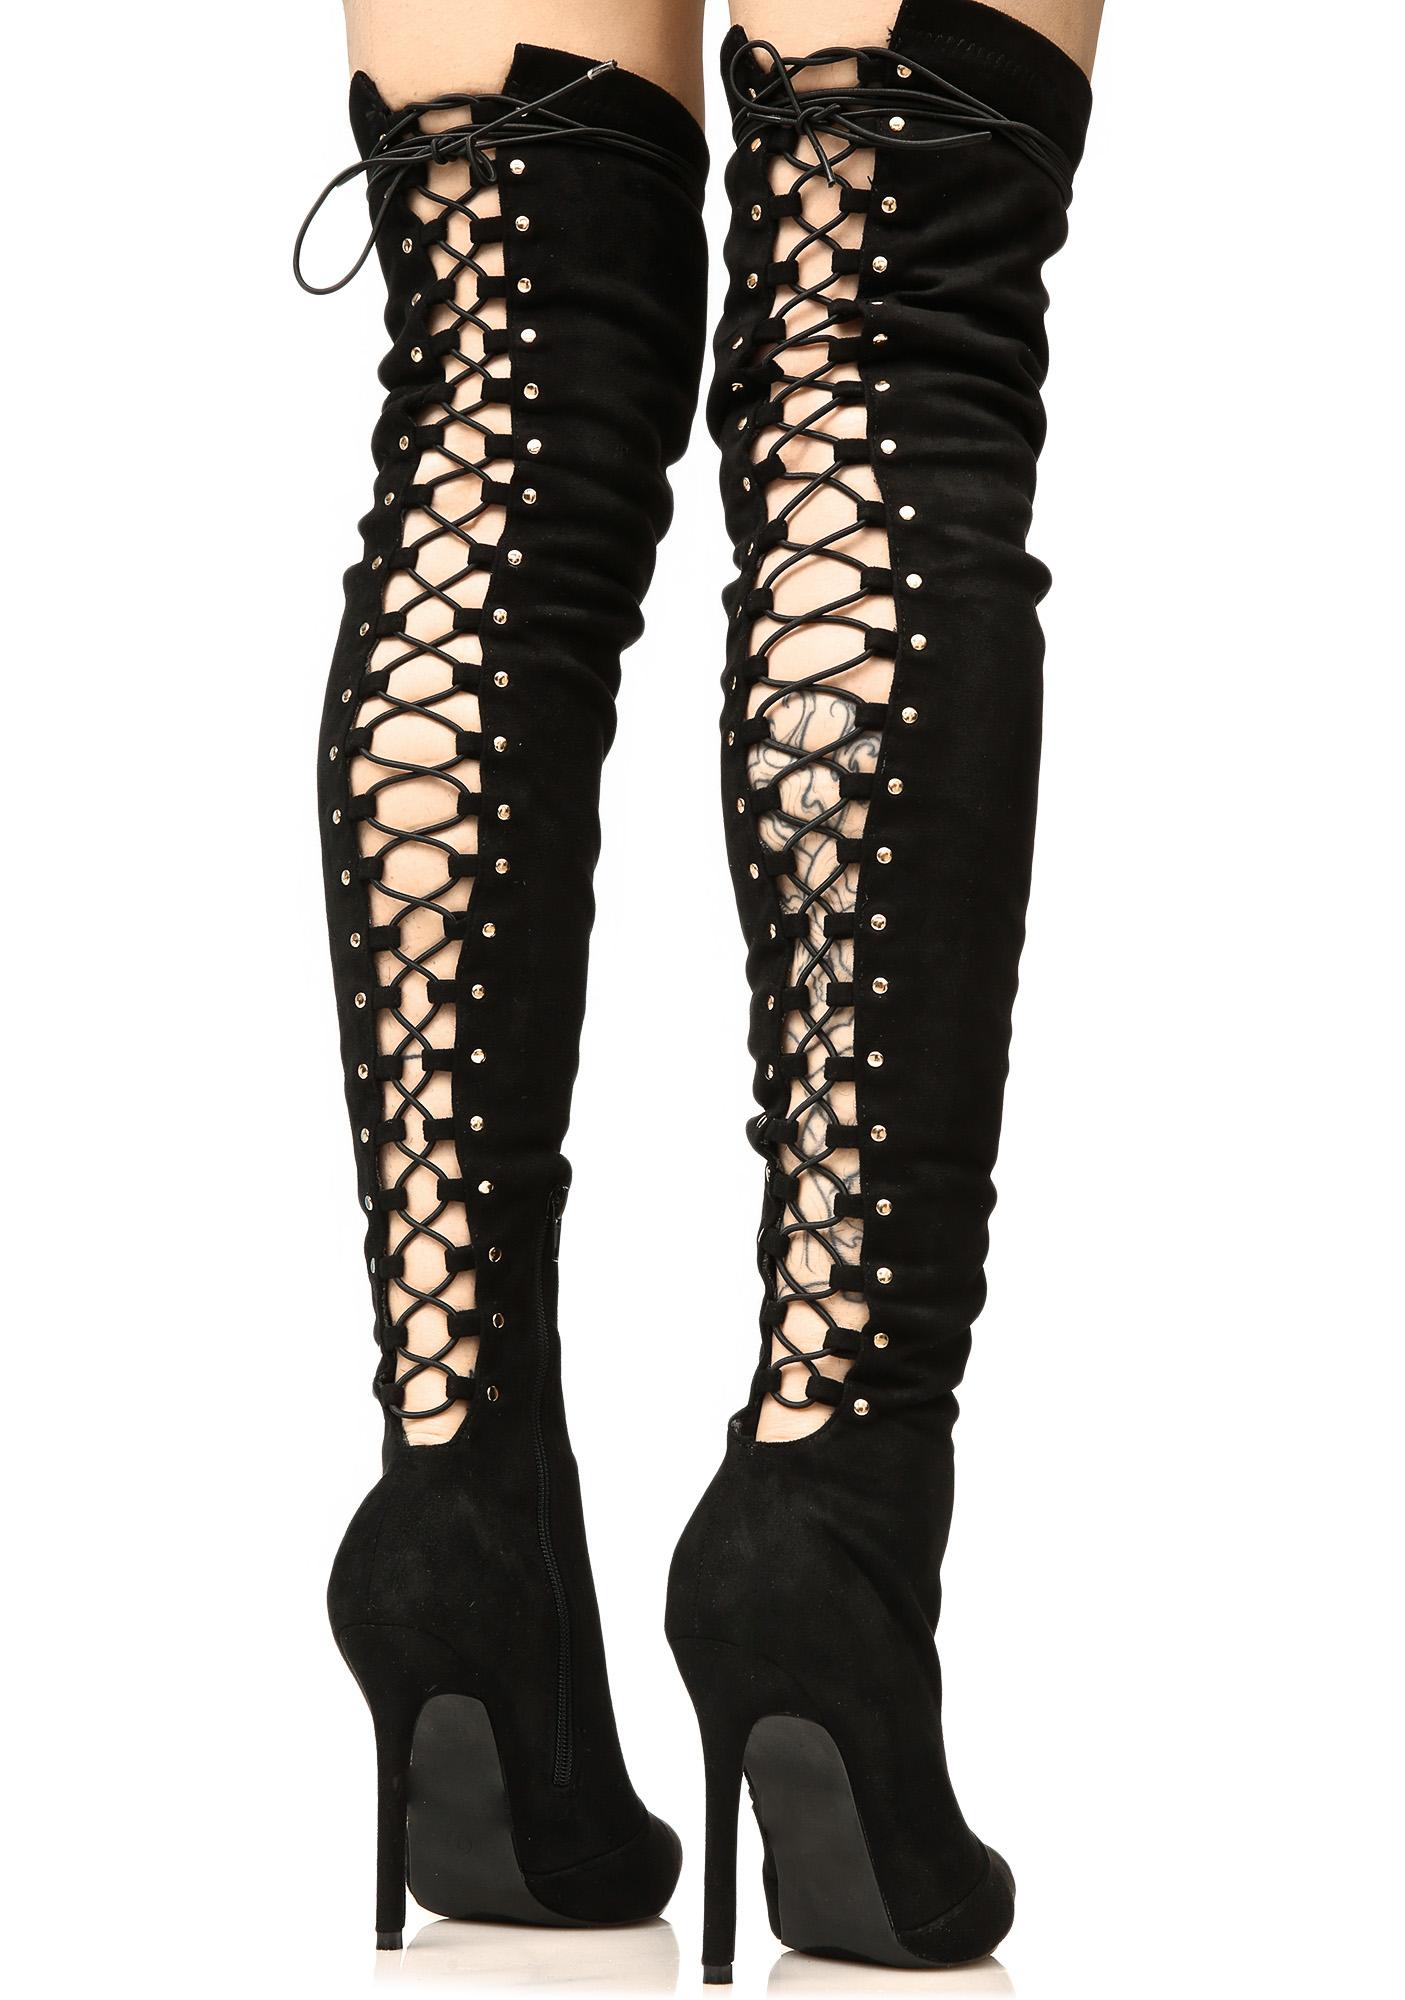 Give Me Fever Lace-Up Thigh-High Boots | Dolls Kill